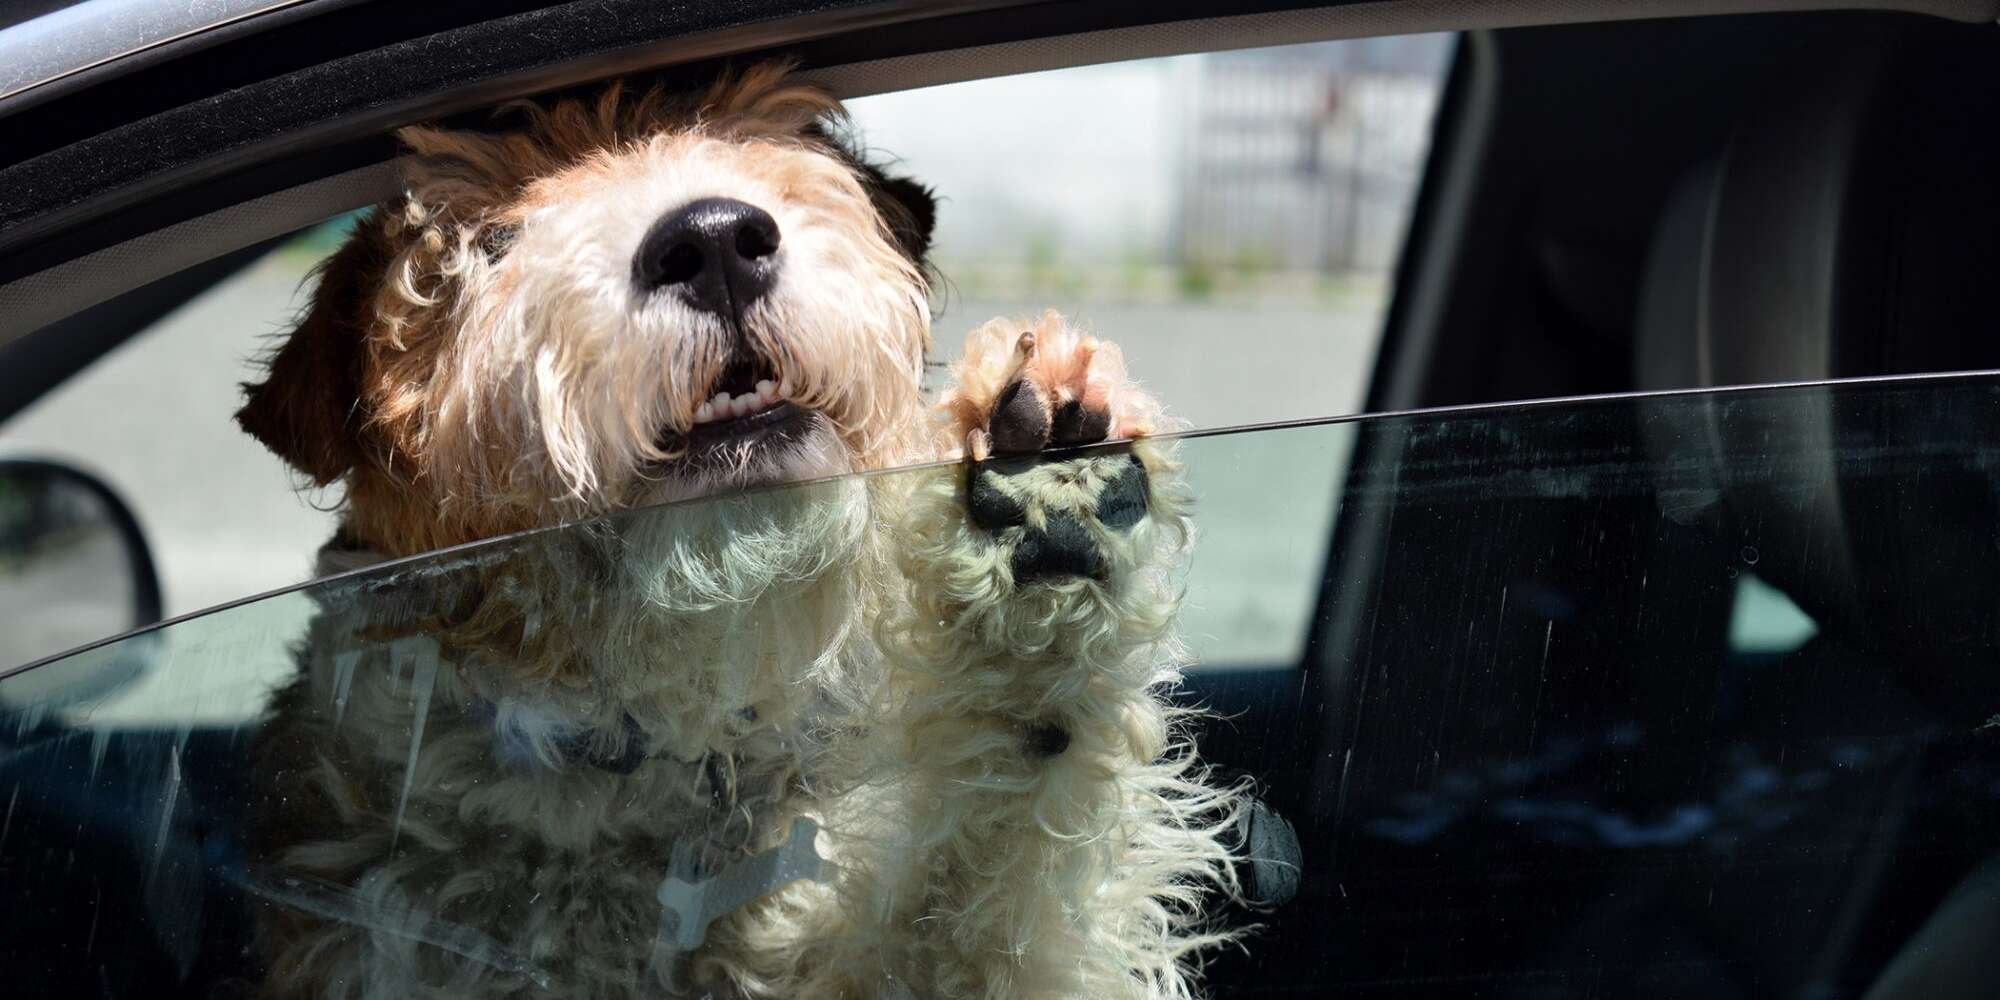 The Do's and Don'ts of Helping Dogs in Hot Cars